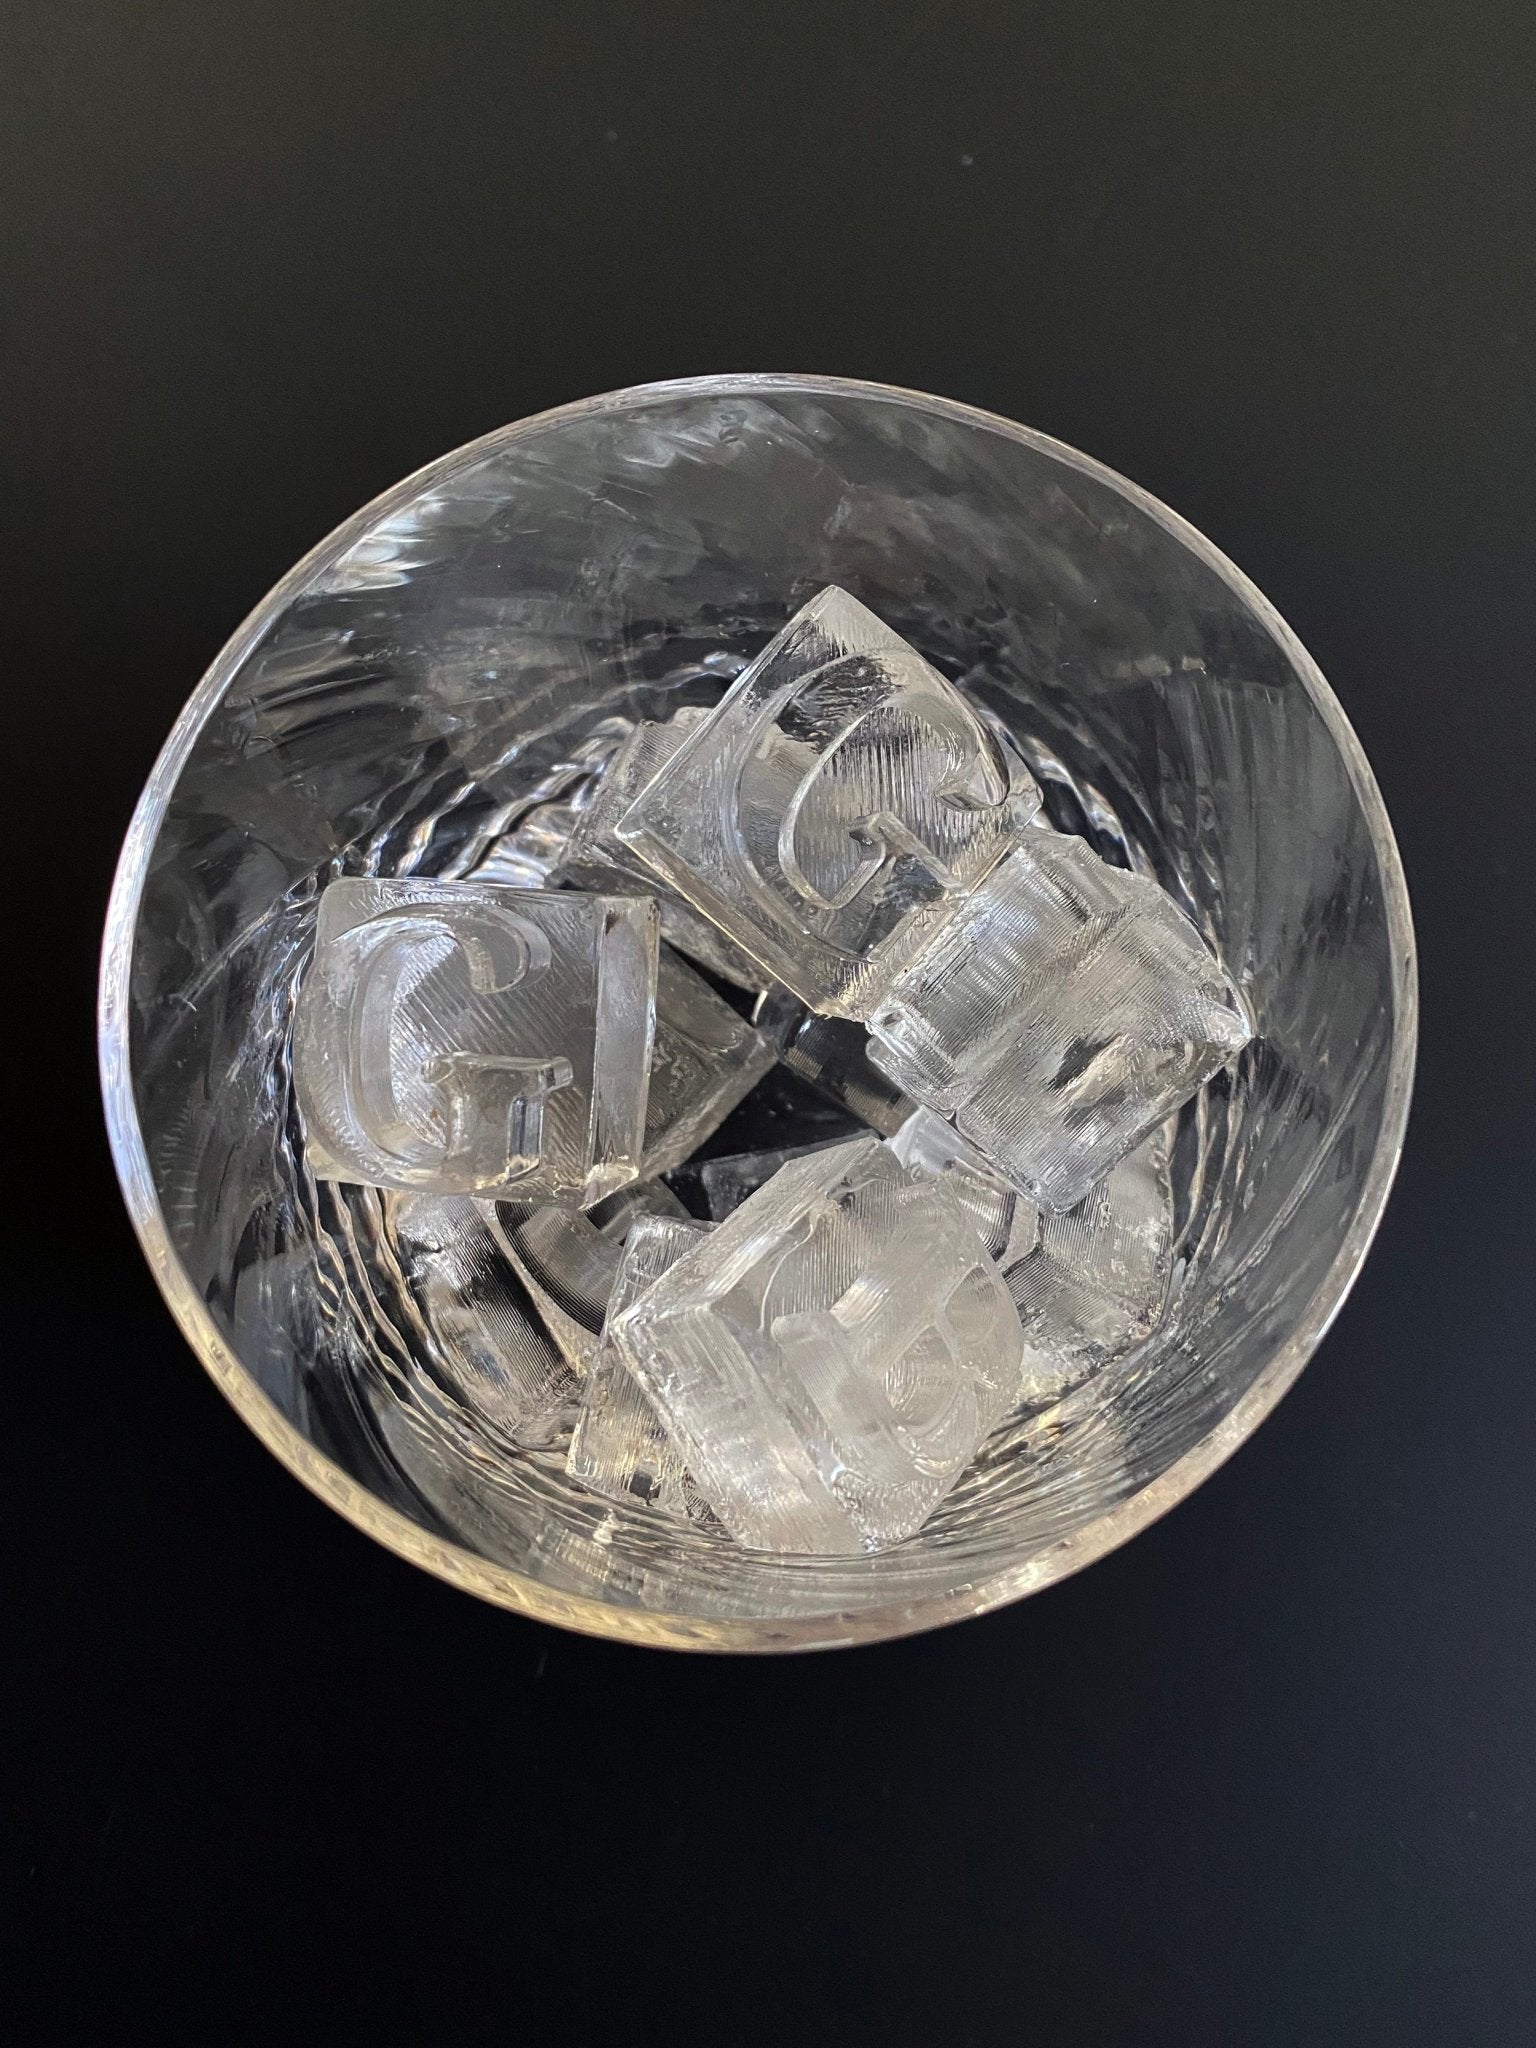 Ice Bowl Mould